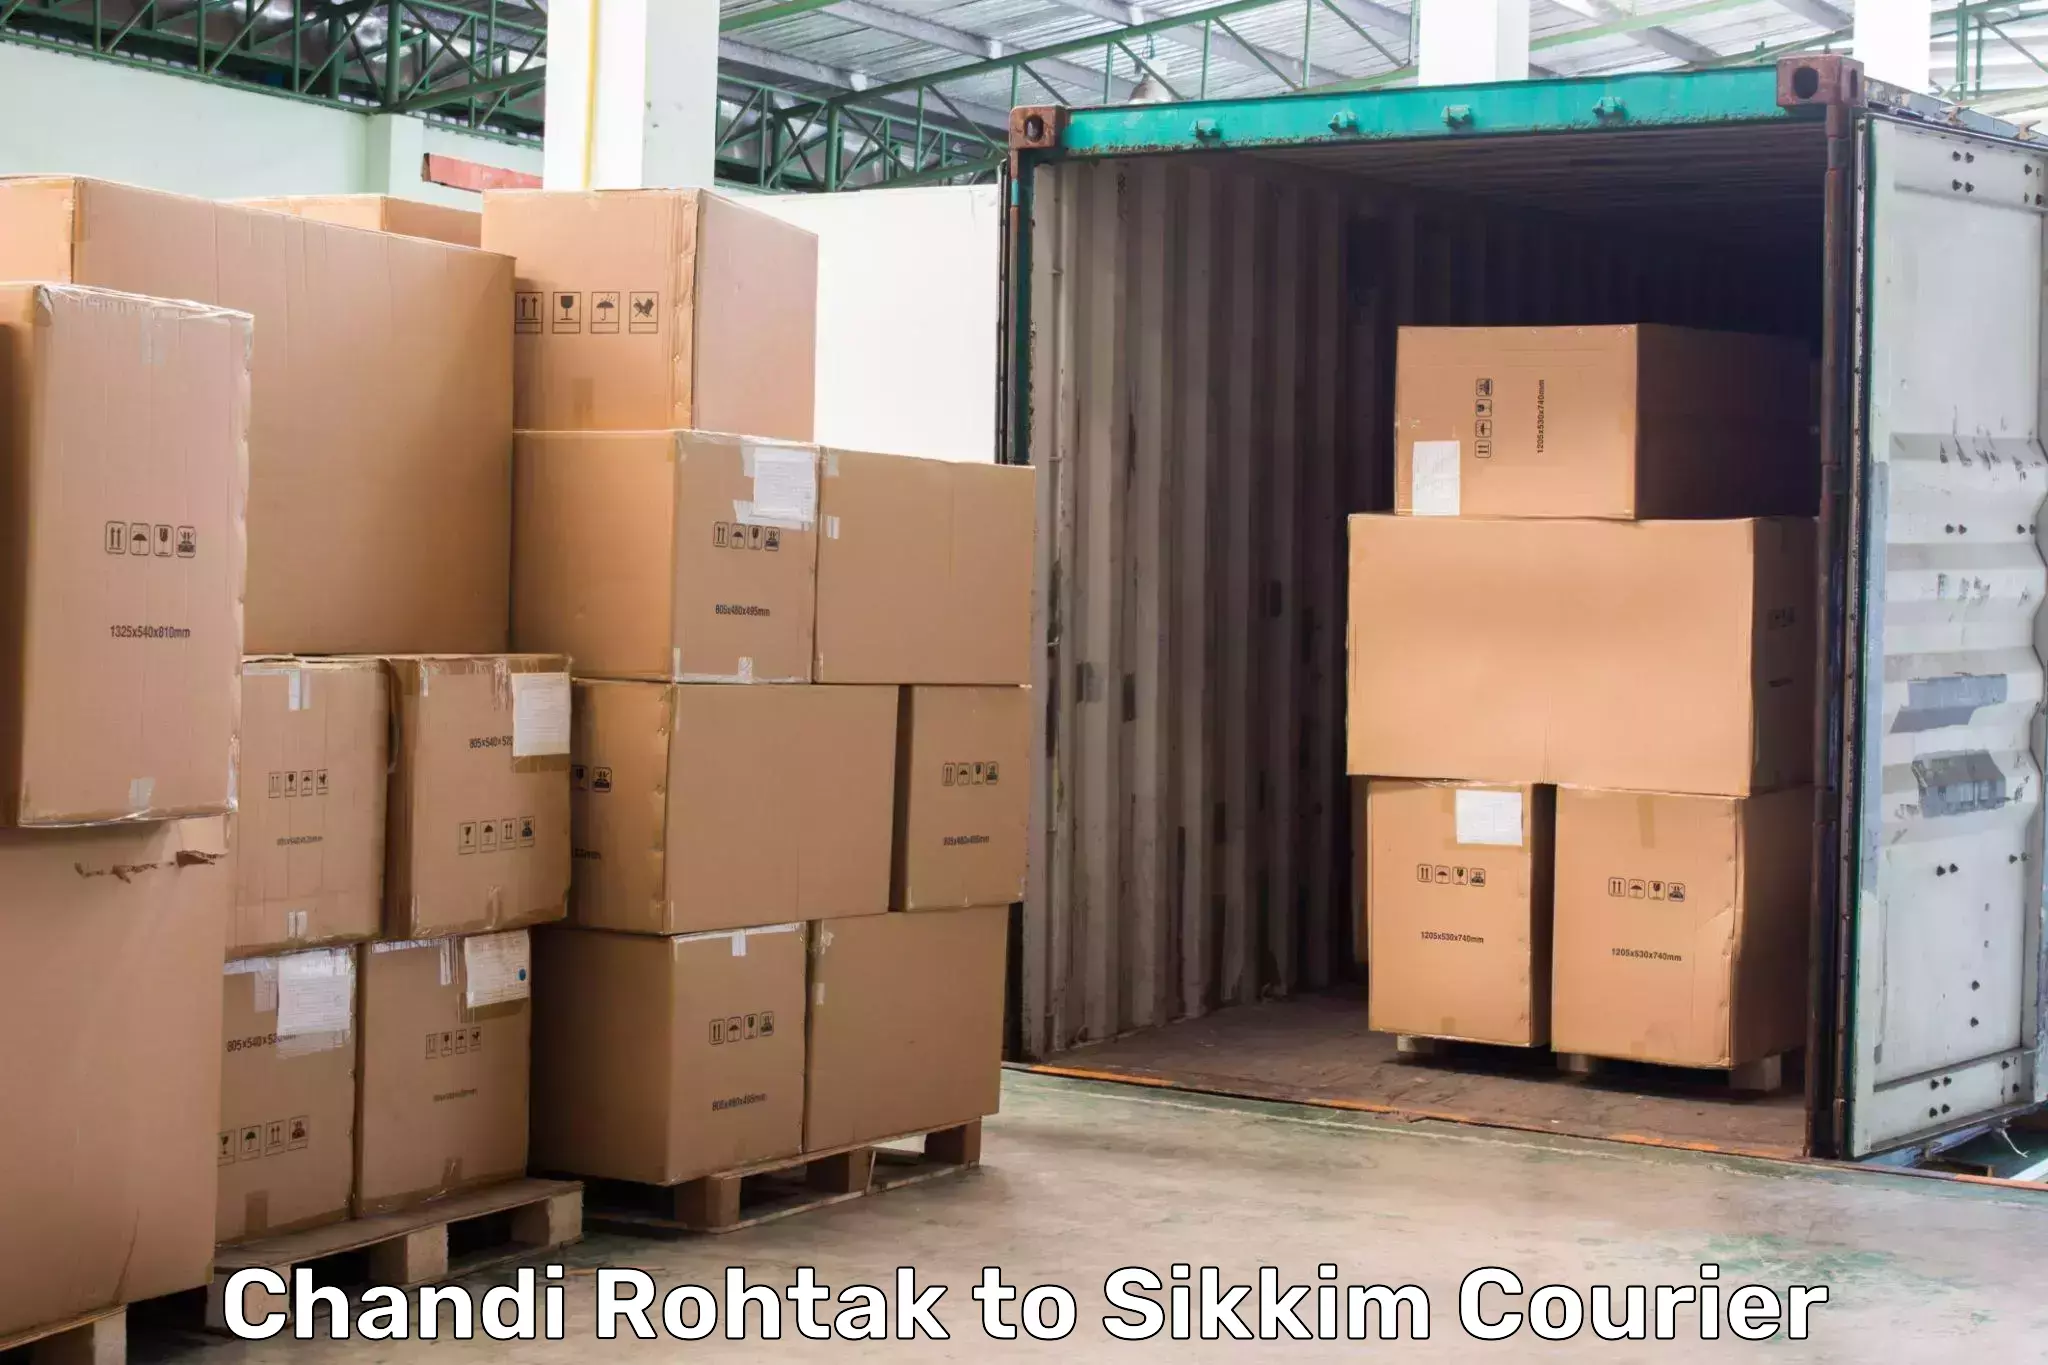 Sustainable courier practices Chandi Rohtak to Pelling